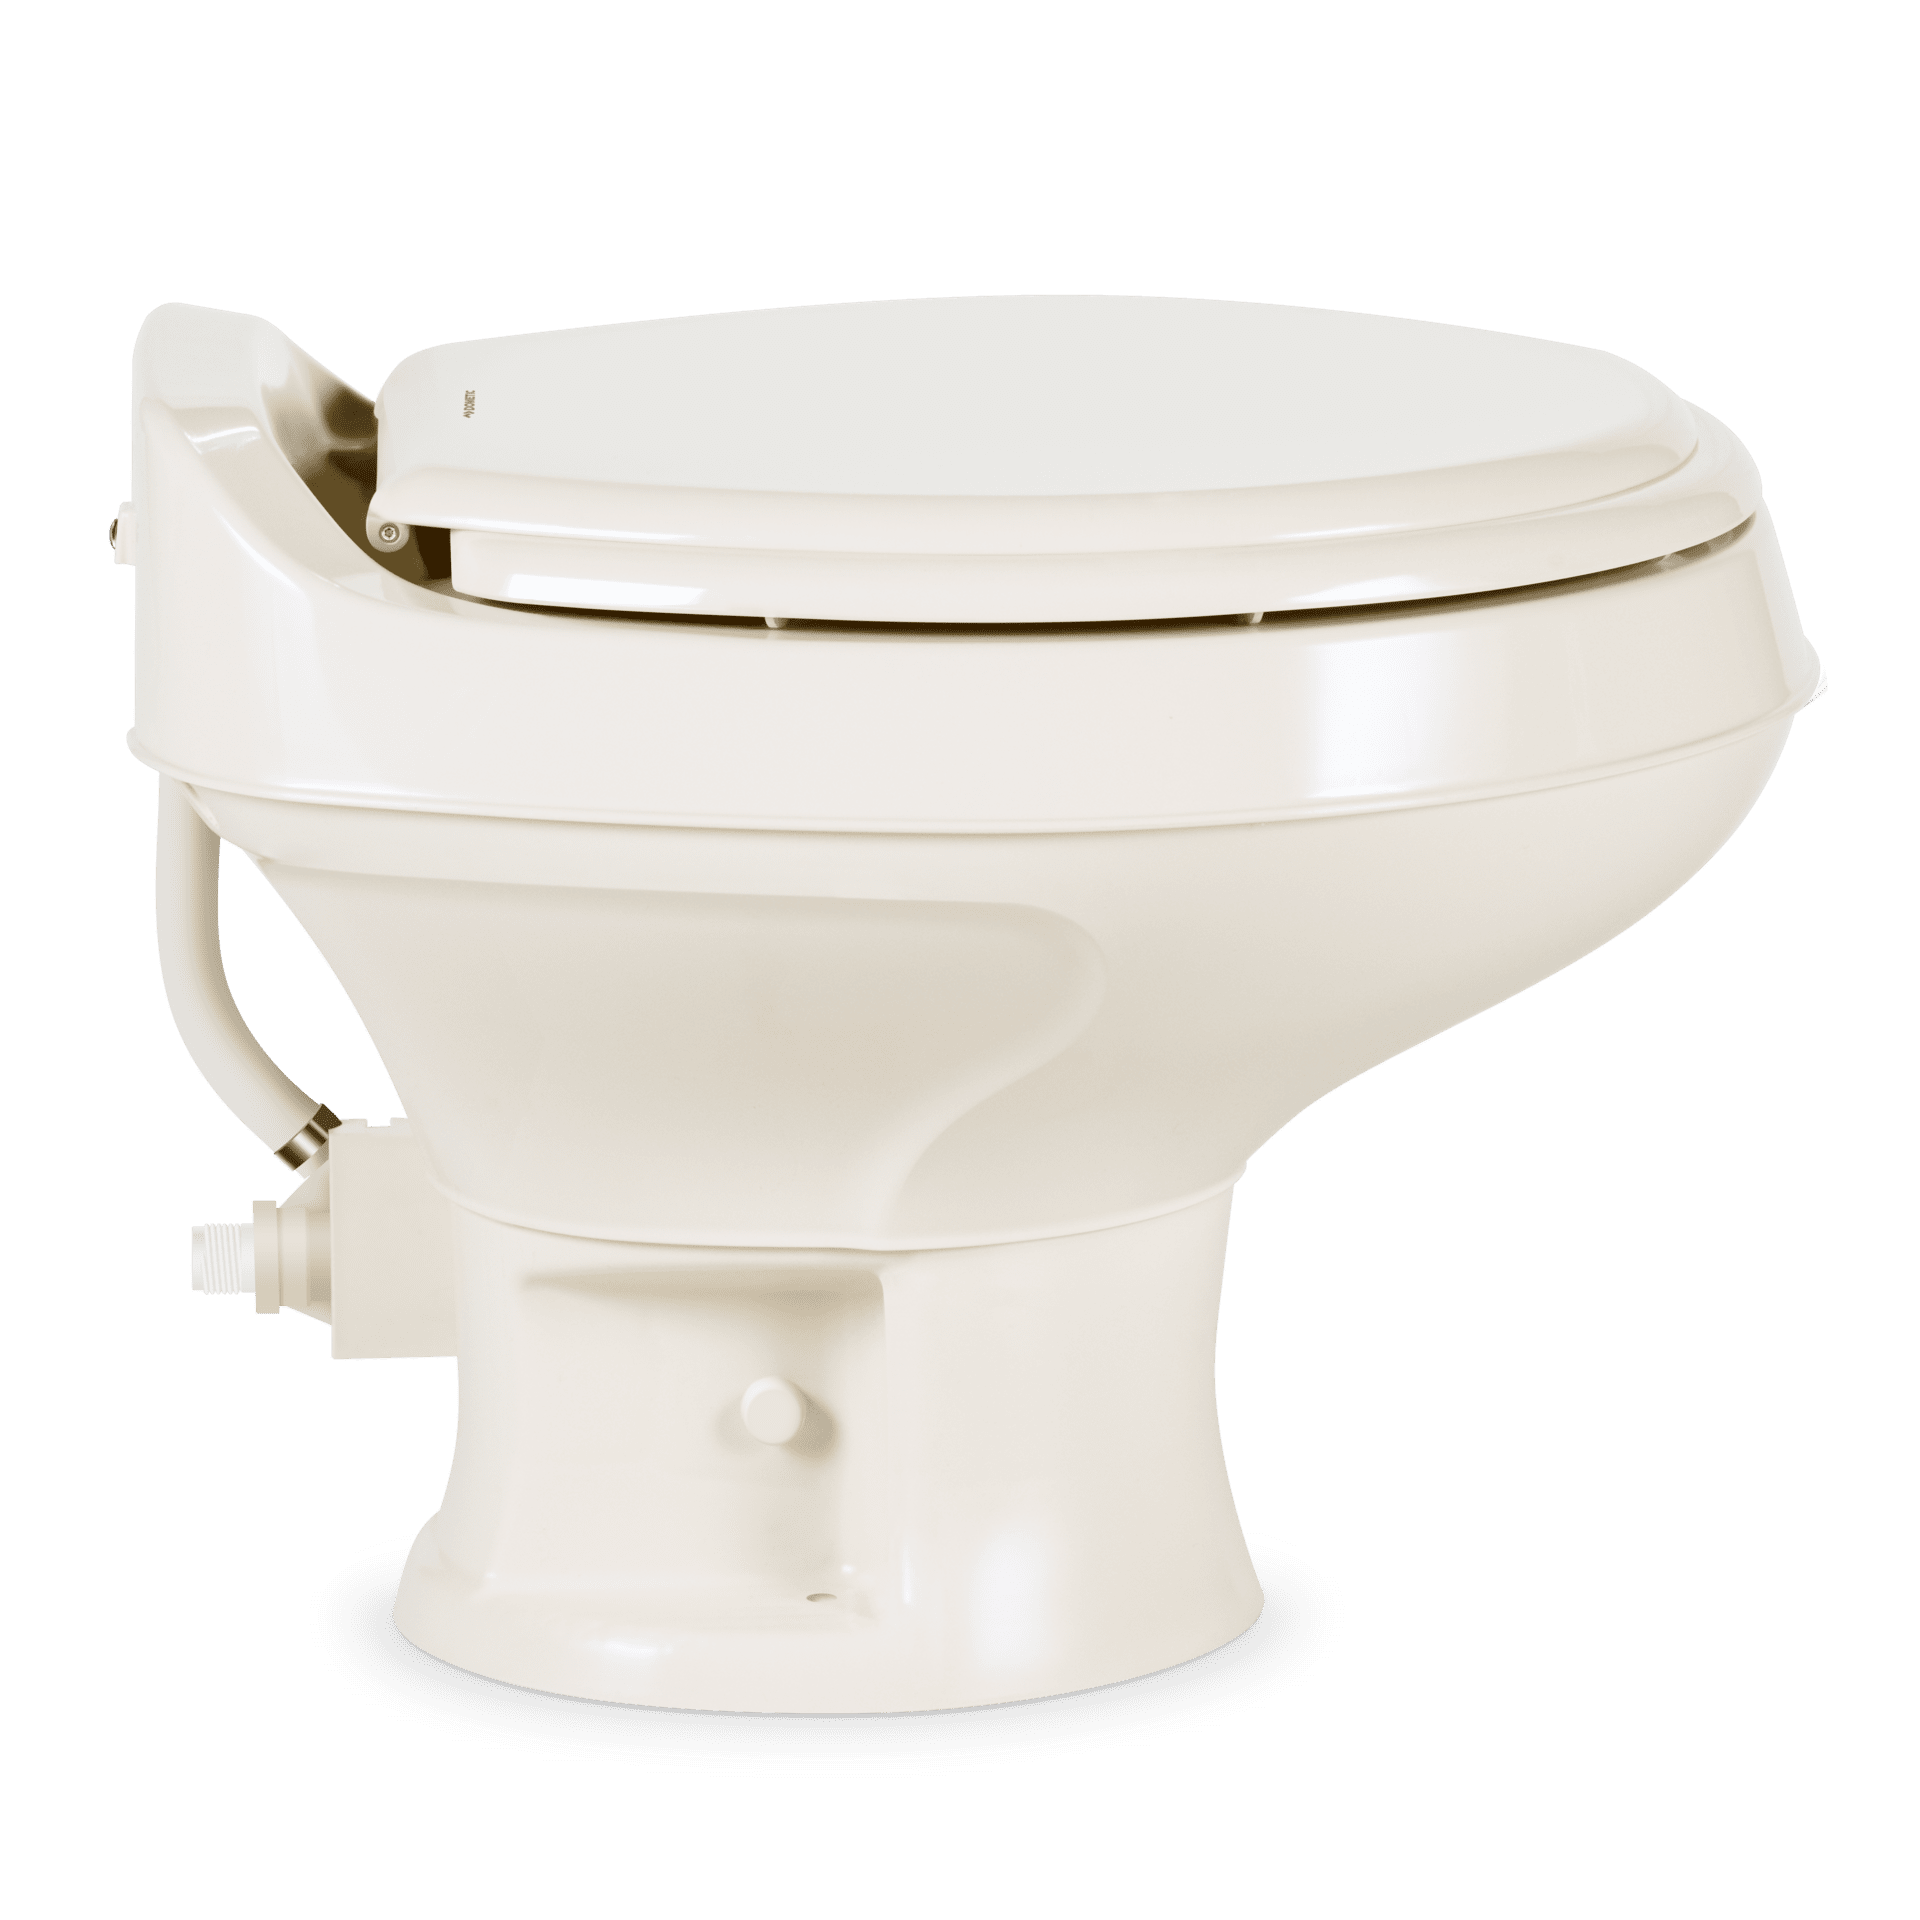 Dometic 300 Series Gravity-Flush RV Toilet - Powerful Triple-Jet Action  Flush with Adjustable Water Level - Standard Height Flush with Foot Pedal  for